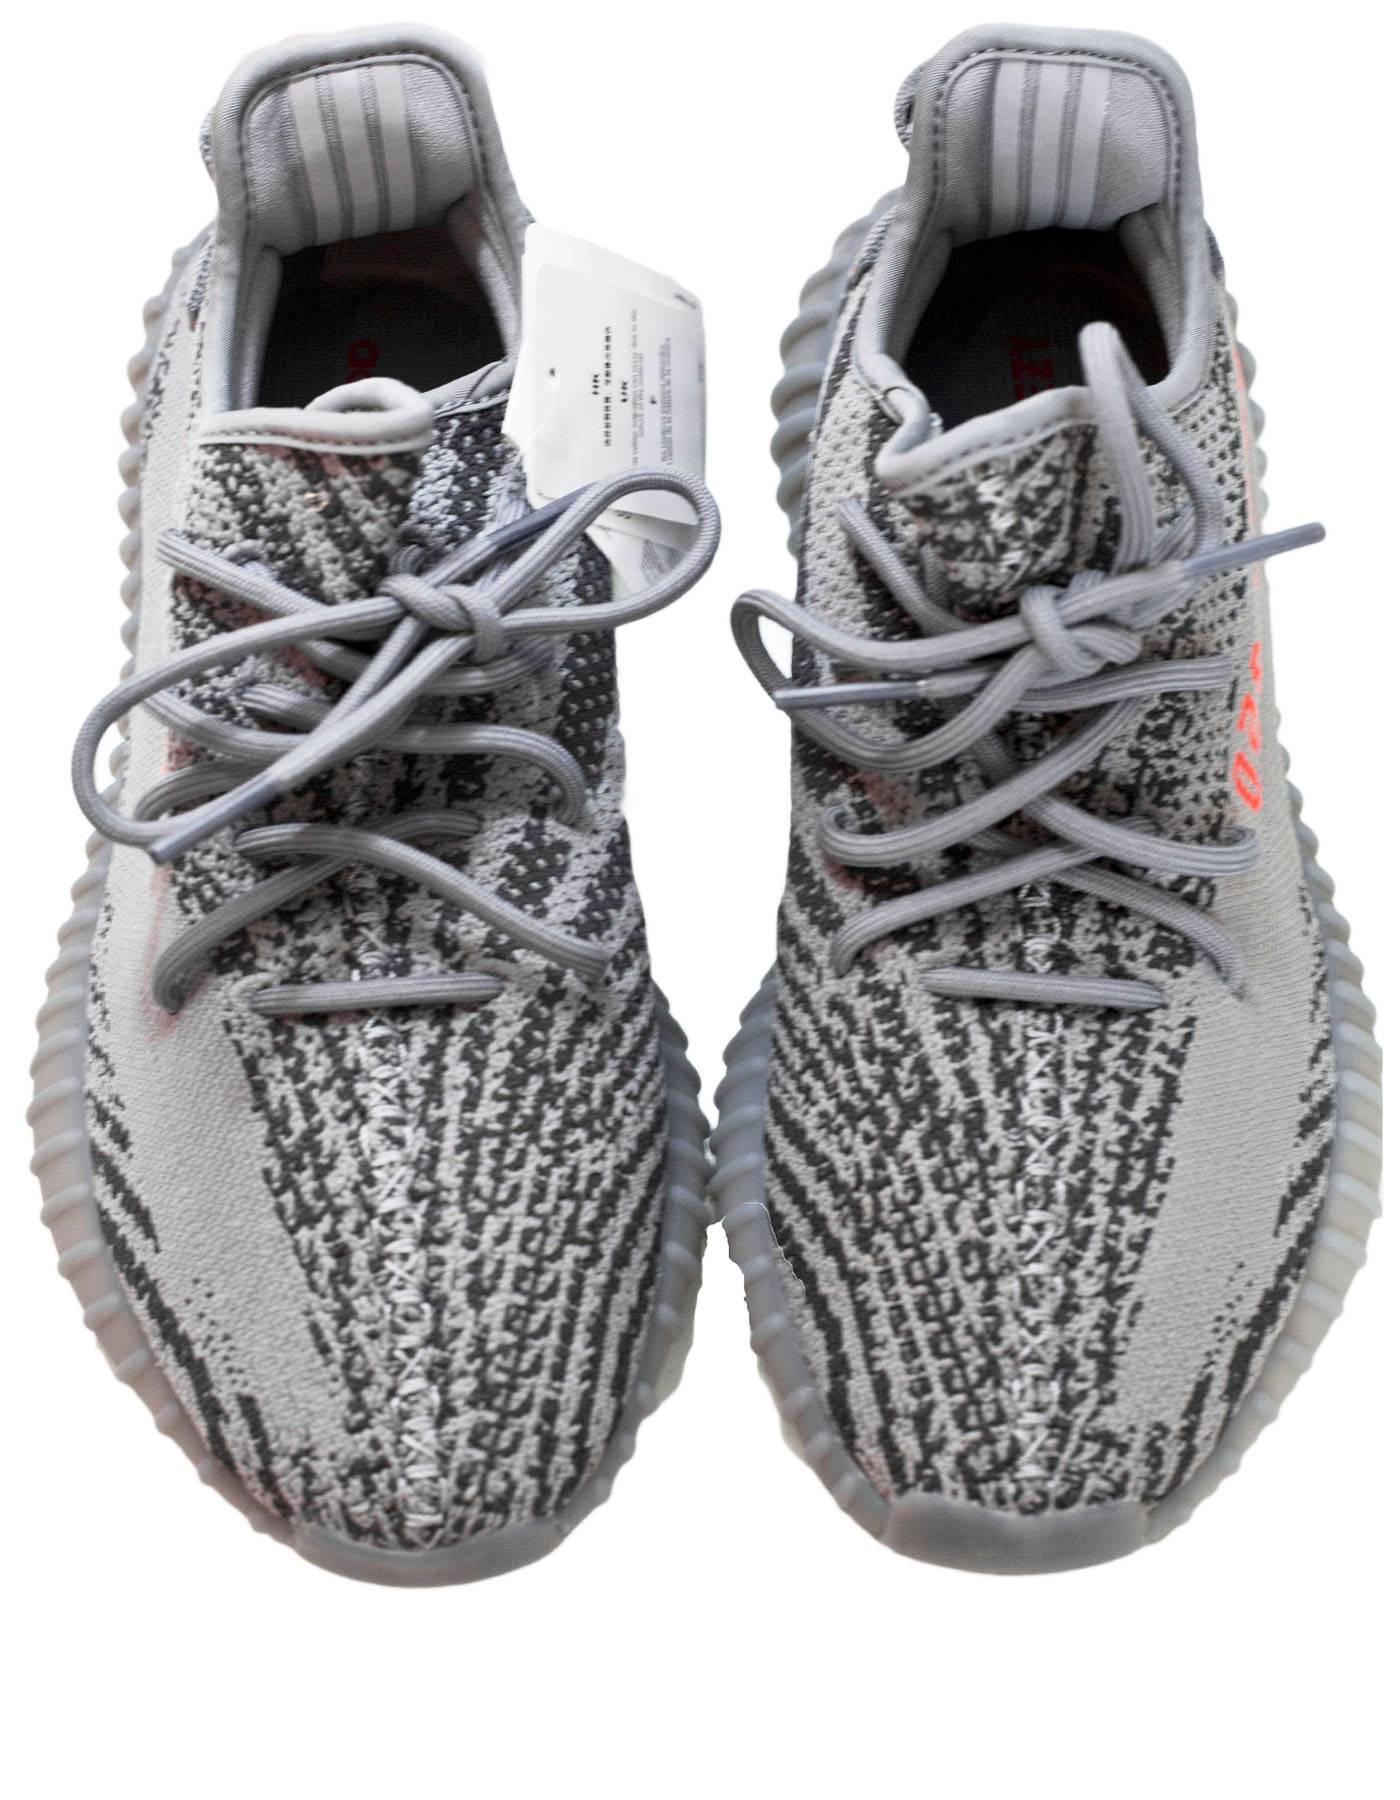 Adidas x Kanye West Yeezy Boost 350 V2 Beluga 2.0 Sneakers Sz 11 NIB 

Made In: China
Color: Grey
Materials: Canvas, rubber
Closure/Opening: Lace tie closure
Sole Sramp: Adidas x Yeezy
Overall Condition: Excellent pre-owned condition - NIB
Included: